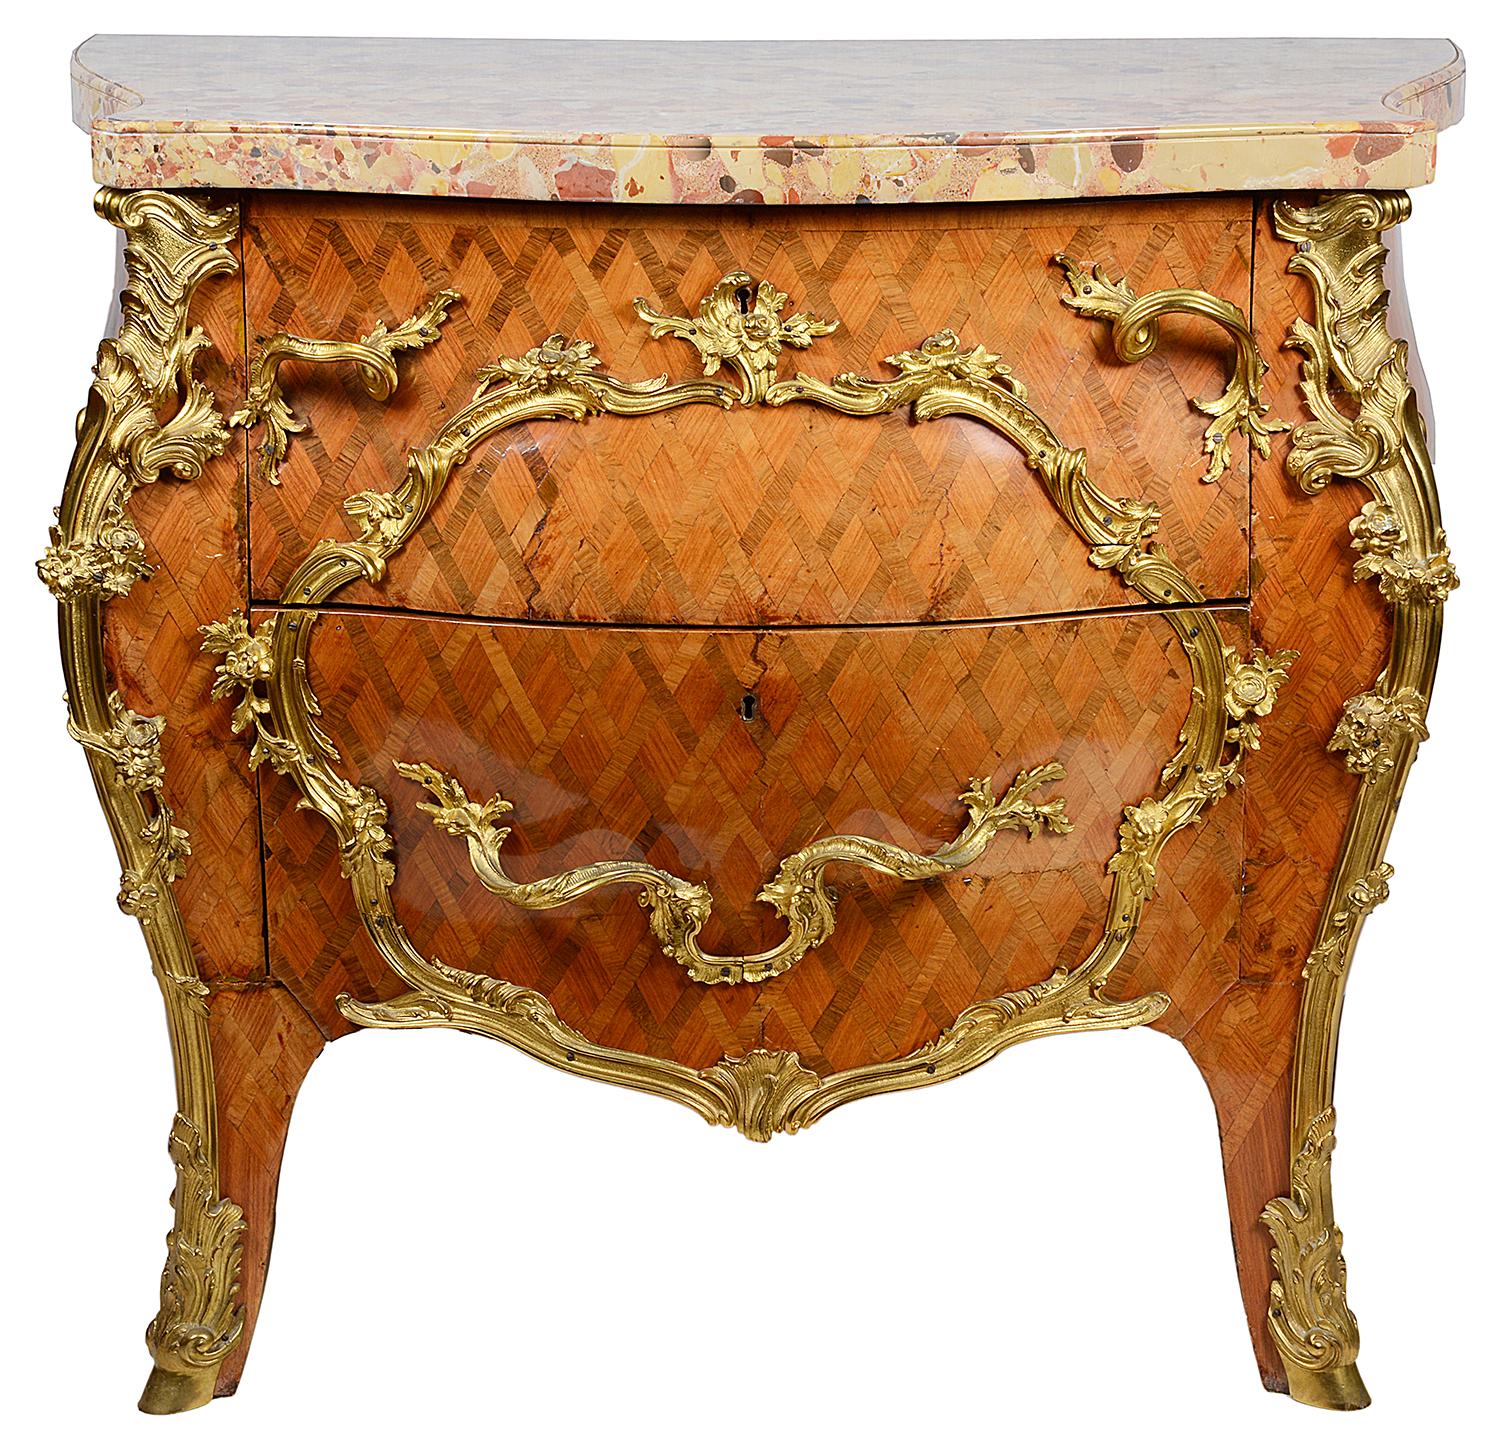 A good quality pair of French 18th century style parquetry inlaid bombe fronted marble topped commodes, each with Rococo influenced gilded ormolu mounts two Oak lined drawers and raised on out swept feet.